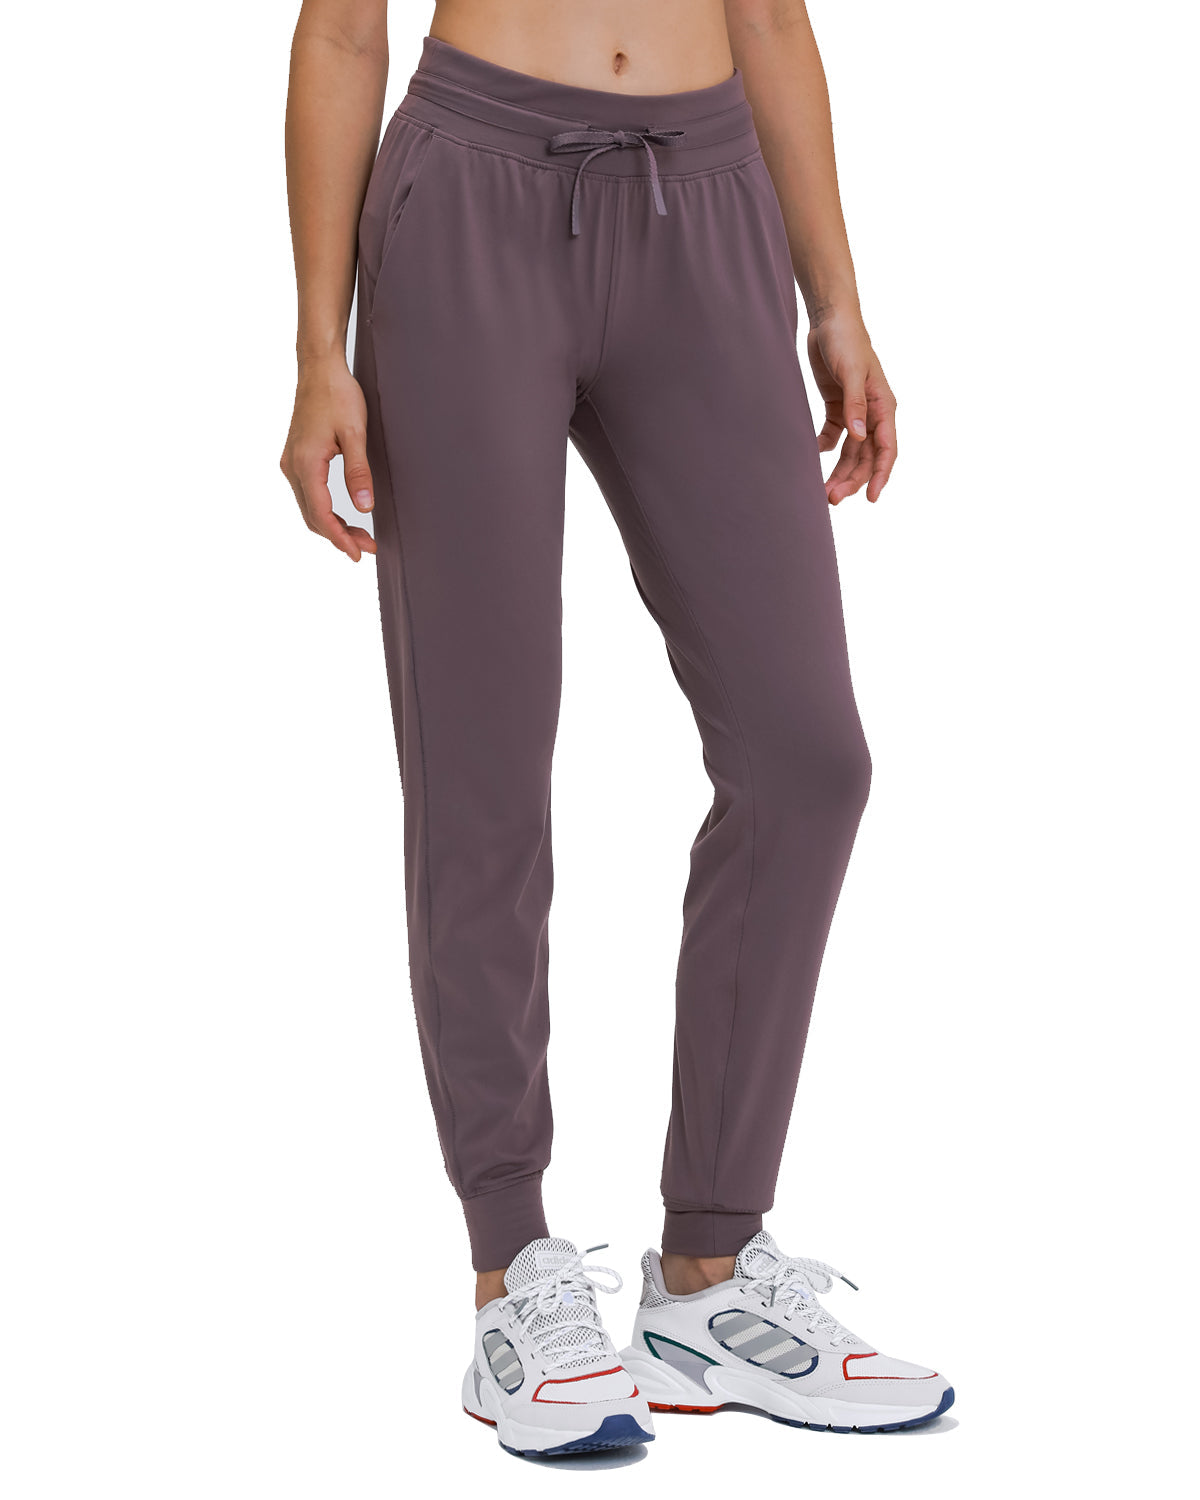 WILLIT Women's Workout Joggers Pants Lightweight Athletic